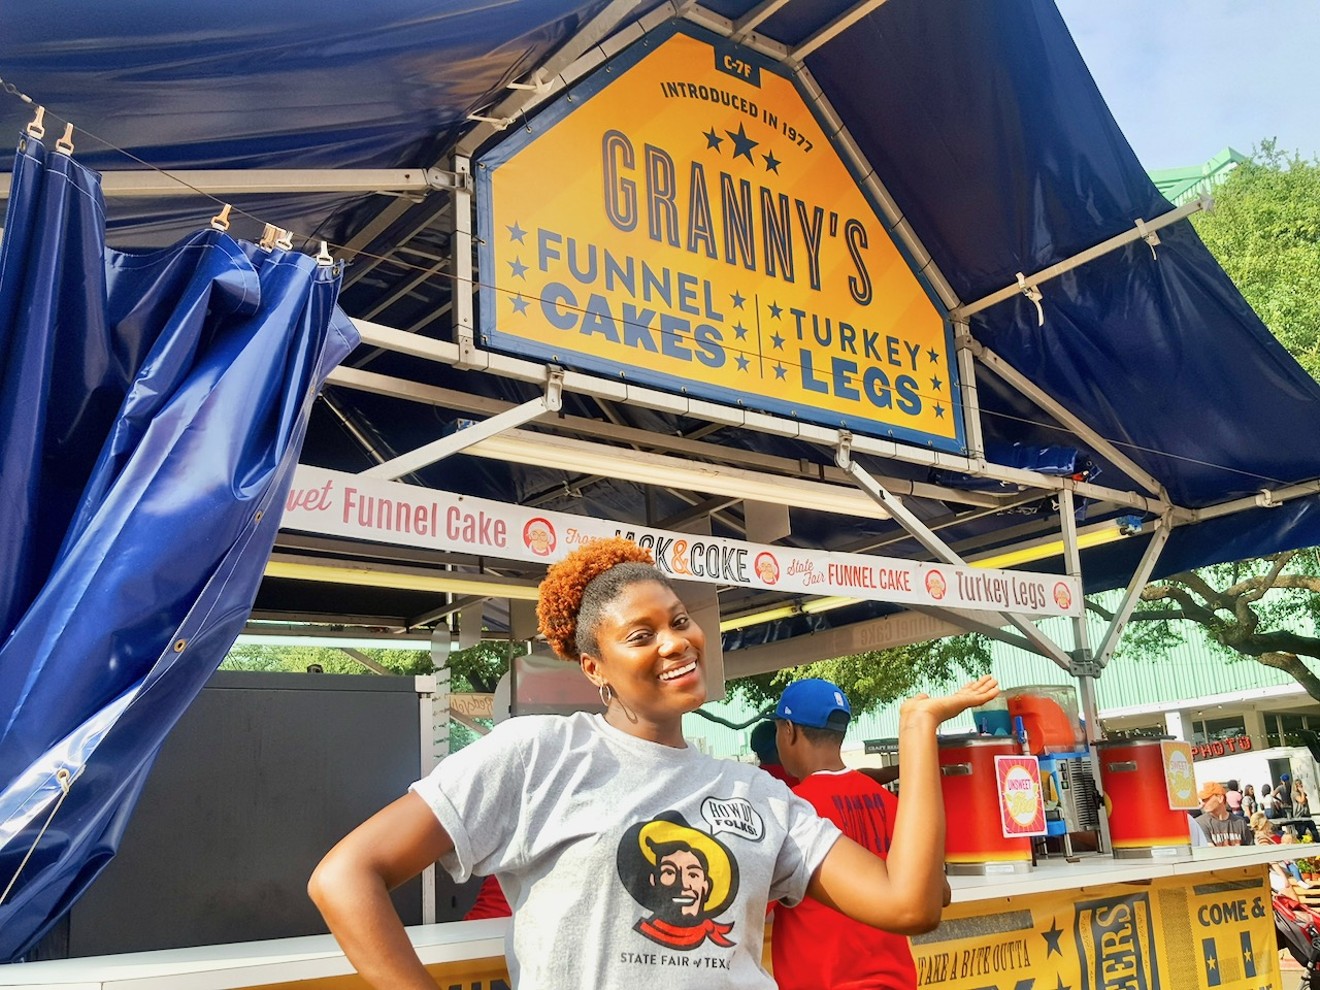 There are lots of places to get a turkey leg at the fair, including Granny's.